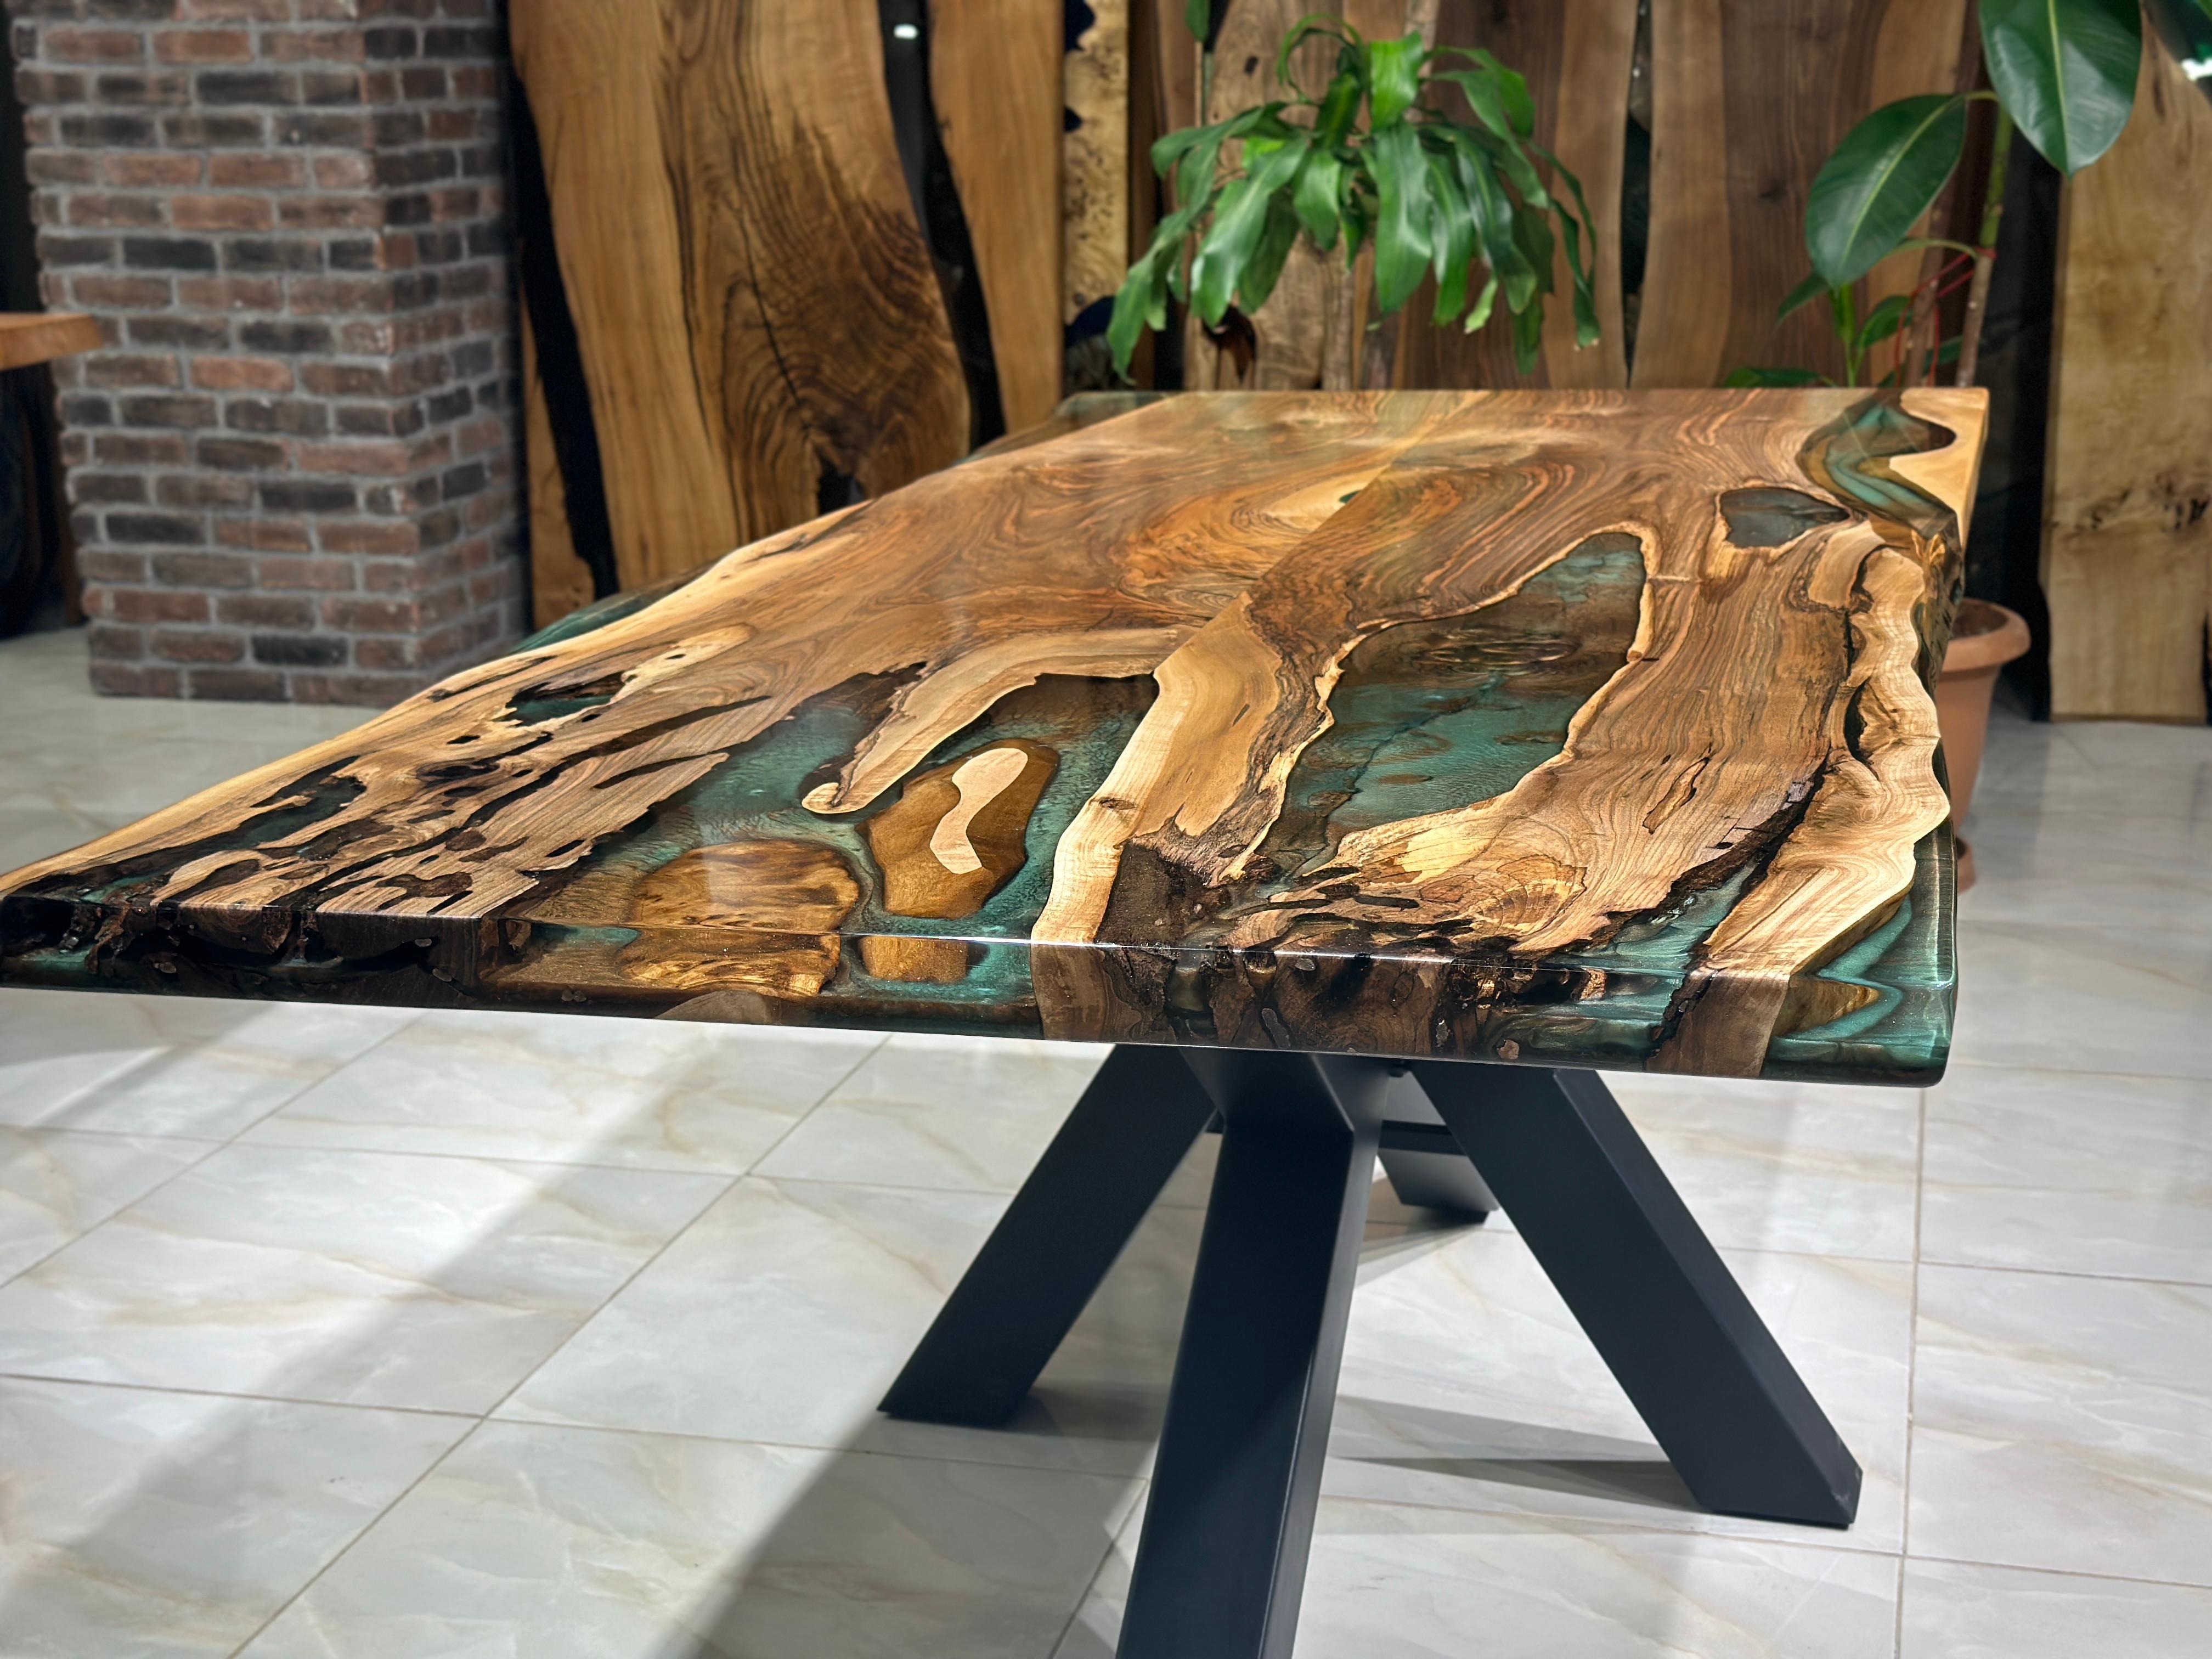 WALNUT GREEN - BROWN EPOXY RESIN DINING TABLE

This epoxy table emerges as a unique work of art, inspired by nature's beauty. 

The epoxy table stands out not only for its design but also its durability. Thanks to its epoxy coating, it is highly